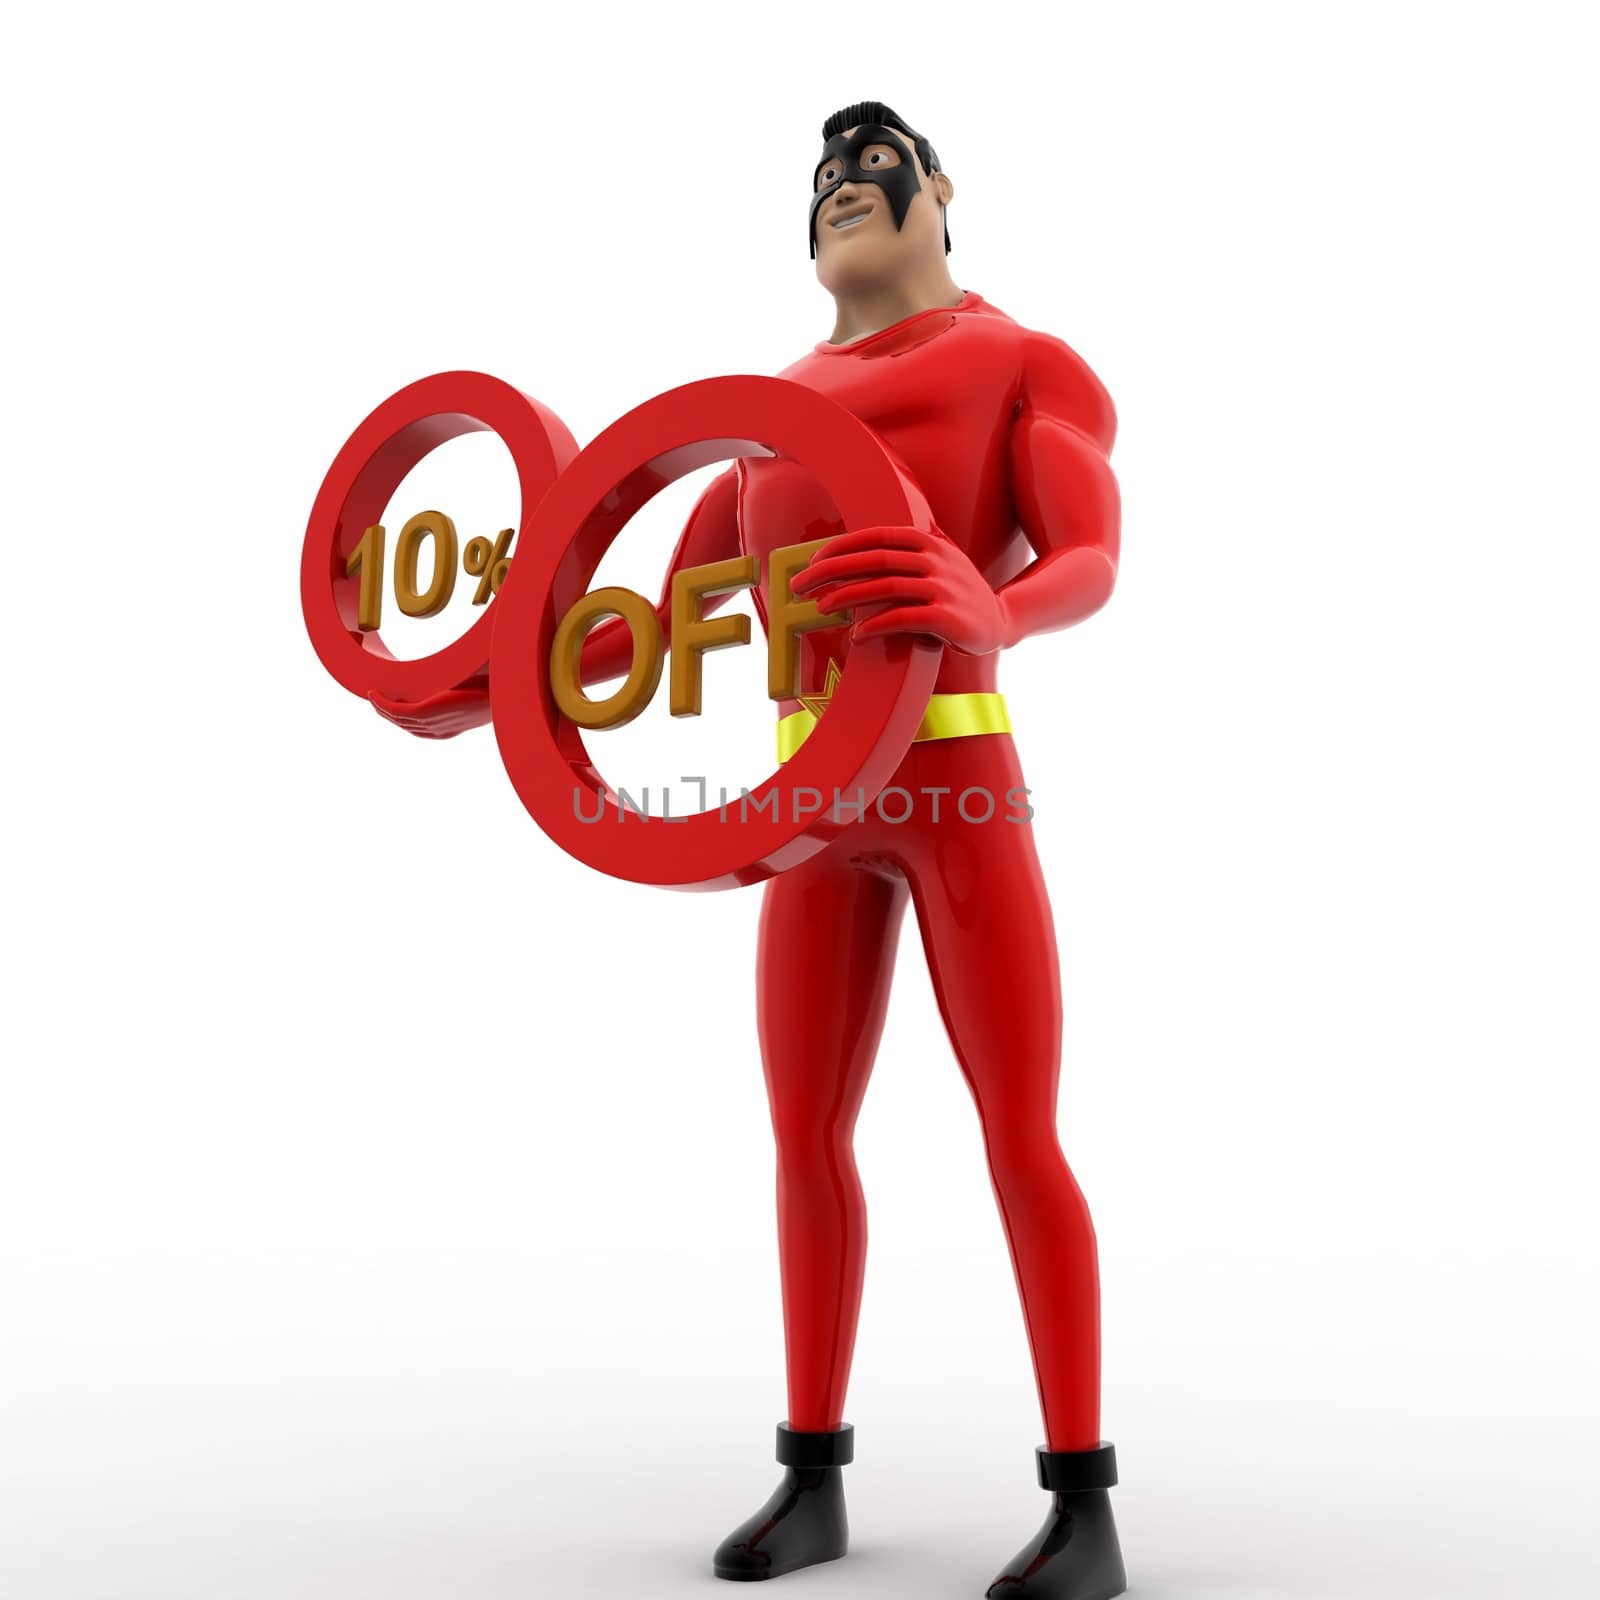 3d superhero 10% off concept on white background,  side angle view